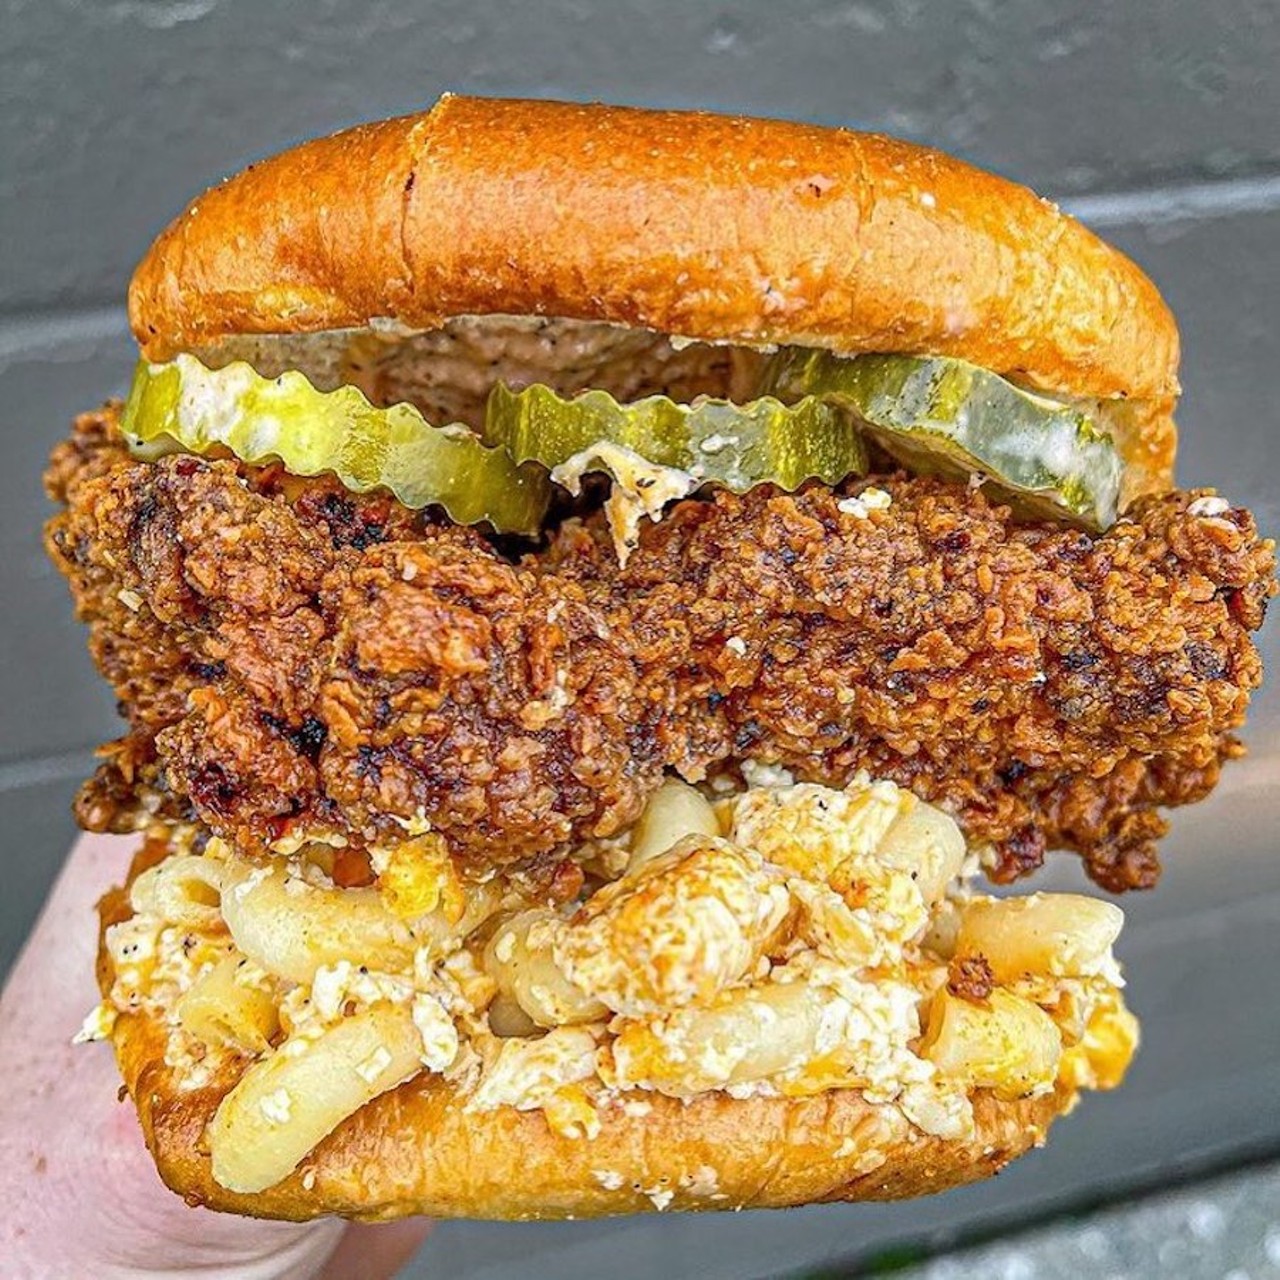 Fat Daddy's Hot Chicken and Waffles
18283 Fort St., Riverview; 734-288-3051; fatdaddys-chicken.com
Take a trip Downriver and you'll find a fried chicken sandwich being slung out of a chicken-focused carry-out shop that brings the heat and the crunch. Fat Daddy's Hot Chicken and Waffles has several sandwiches to choose from, but you can't go wrong with the original. The Fat Daddy is made with jumbo boneless chicken, comeback sauce, pickles or peppers, and served on a brioche bun and can be made in a variety of heat/spice levels. They also have the Mac Daddy, which is a chicken sandwich topped with a five-cheese mac and cheese, because why the hell not? While we're throwing inhibitions to the wind, try the Suga Mama, which is a spicy, honey-drenched chicken sandwich with donuts for buns. We have three words: bring it on. 
Photo via Fat Daddy's Hot Chicken and Waffls/Facebook